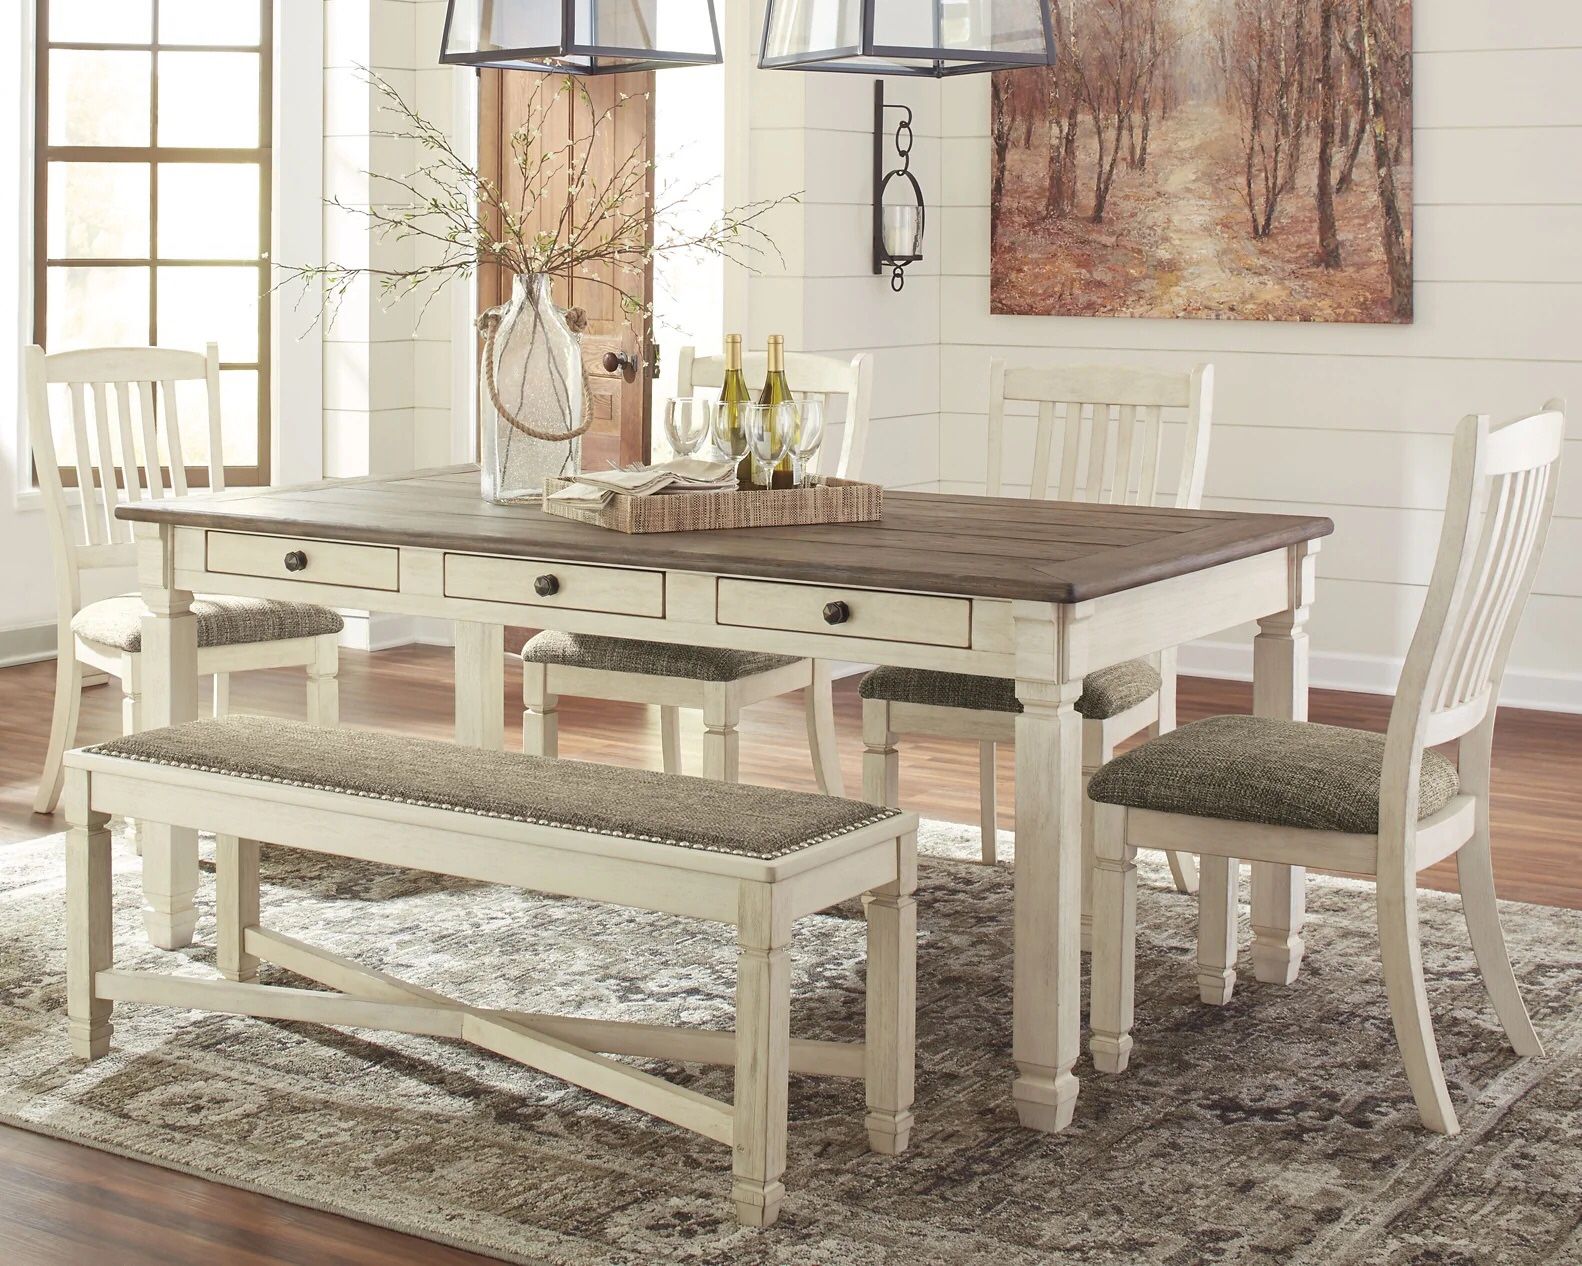 New Bolanburg Dining Table, 4 Chairs, & Bench